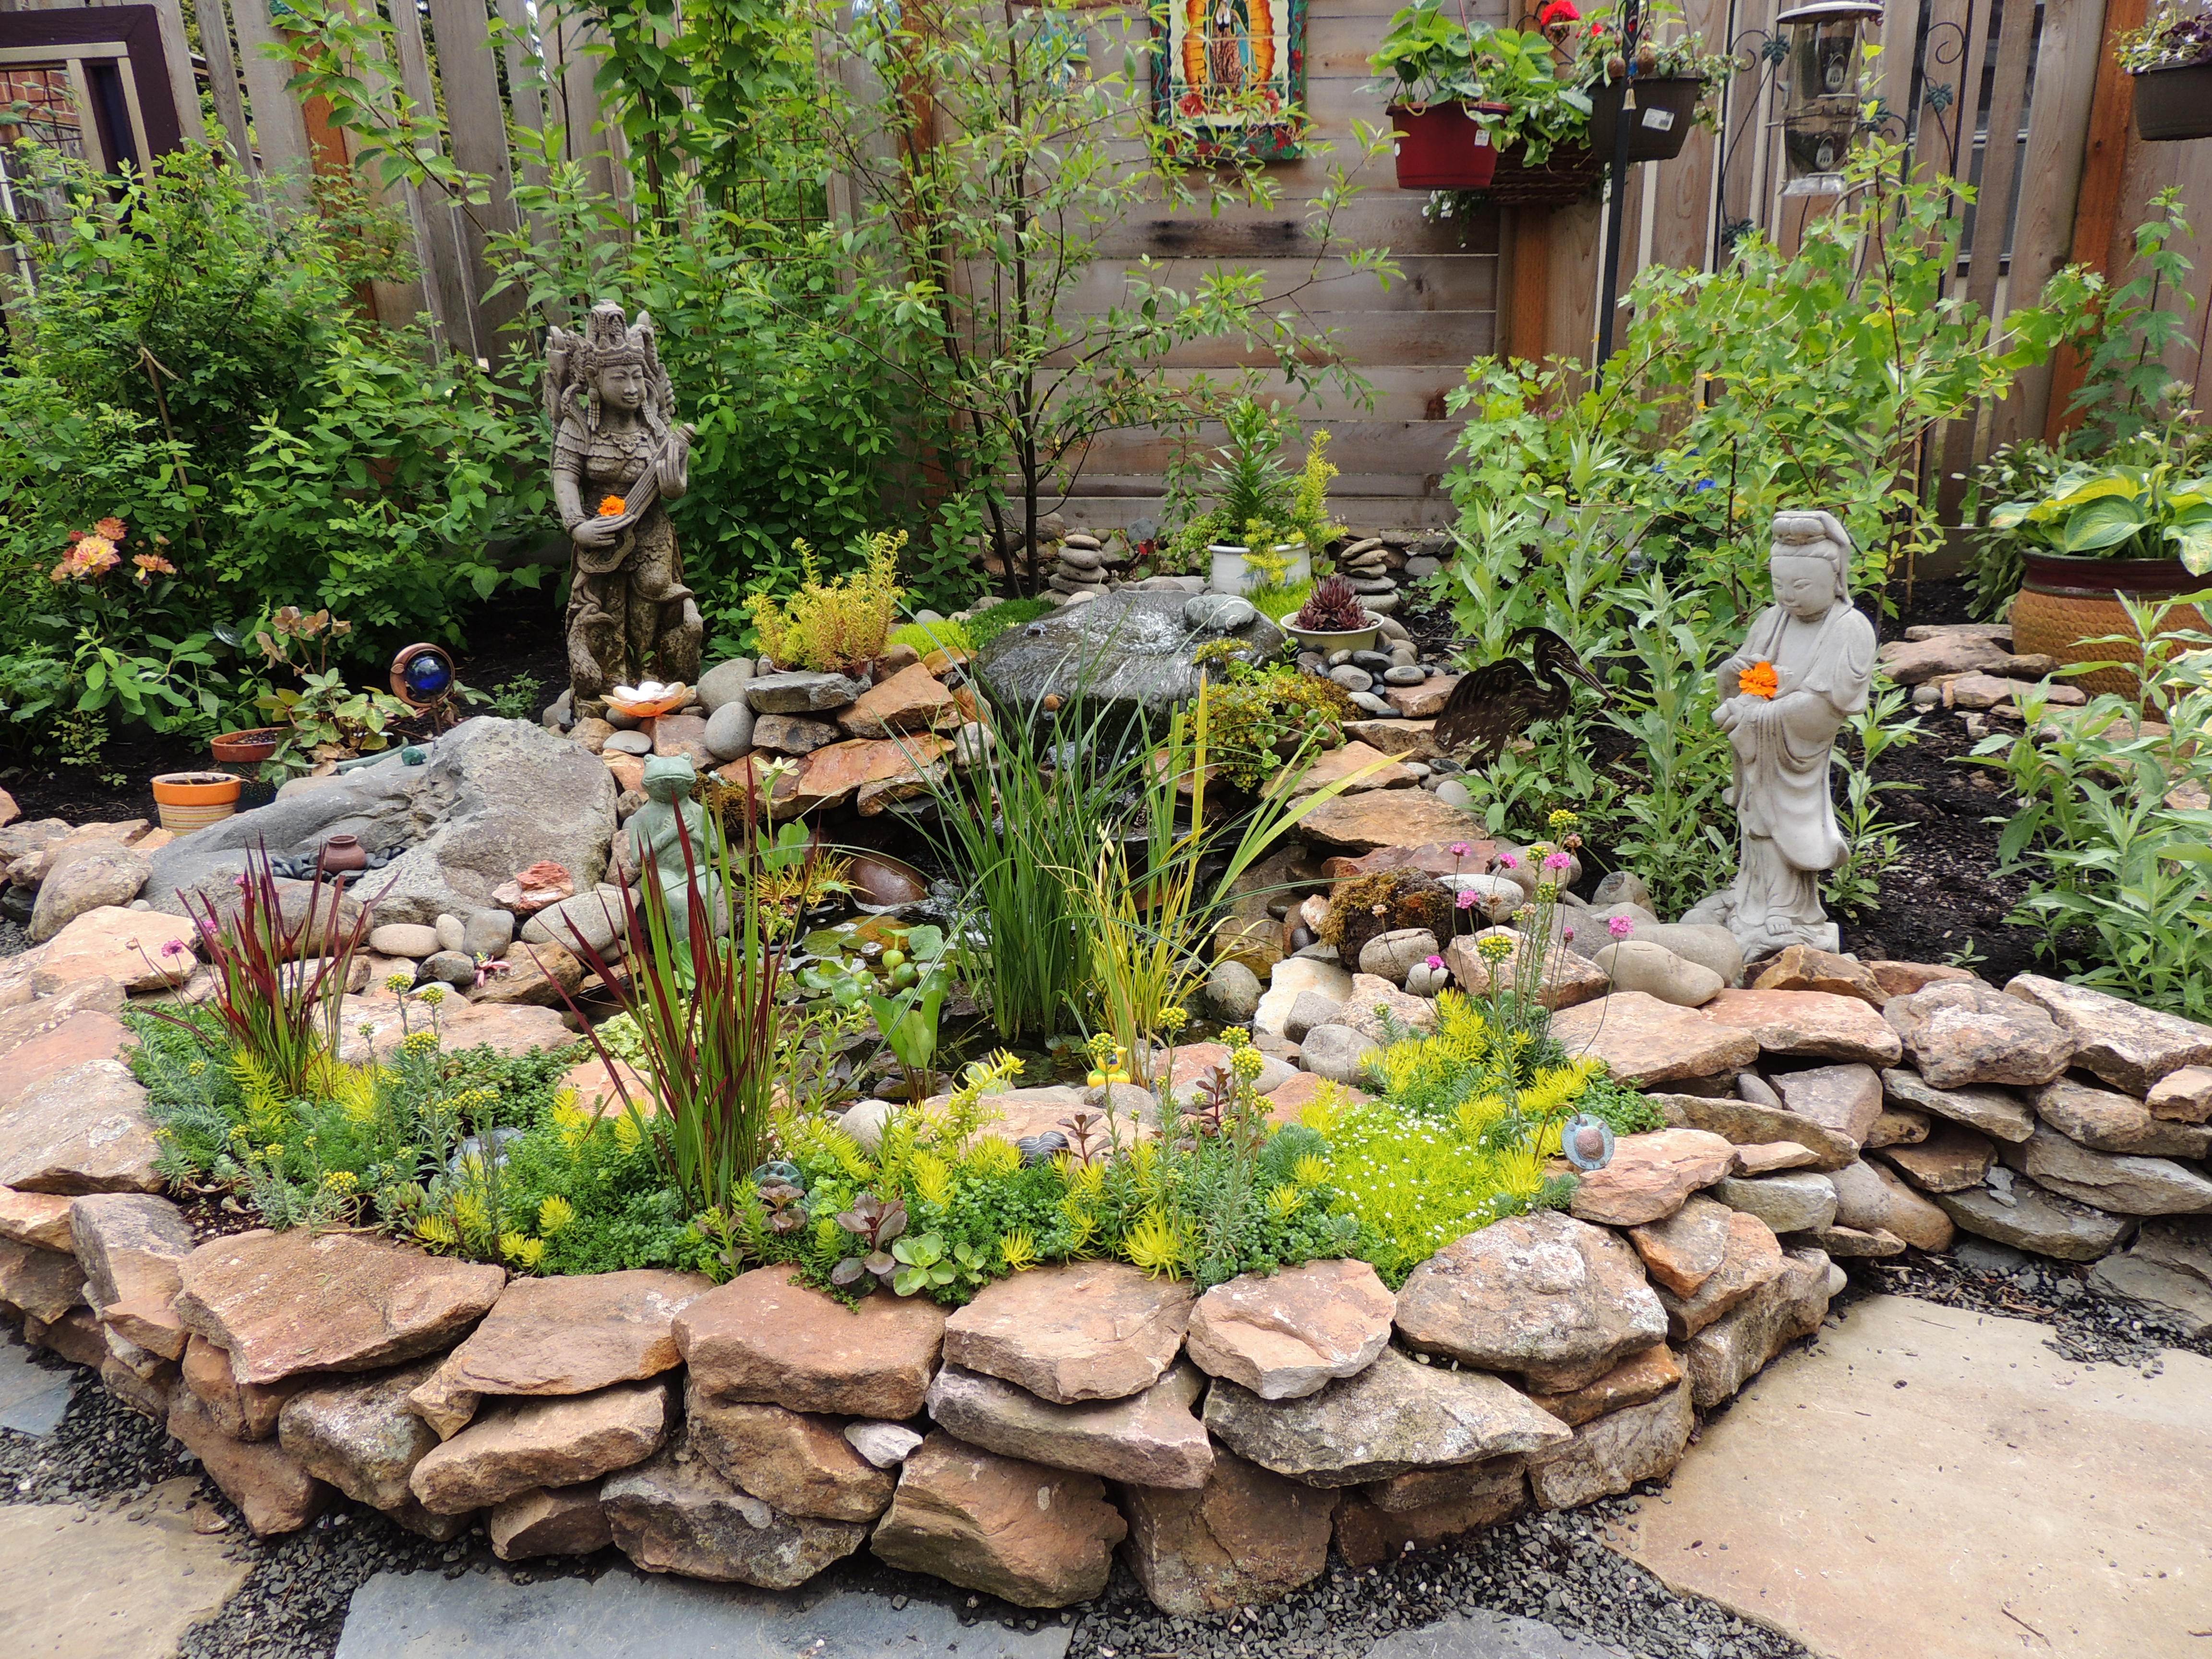 Garden. Pond lined with stones. Statues. Plants. Stone pavers.